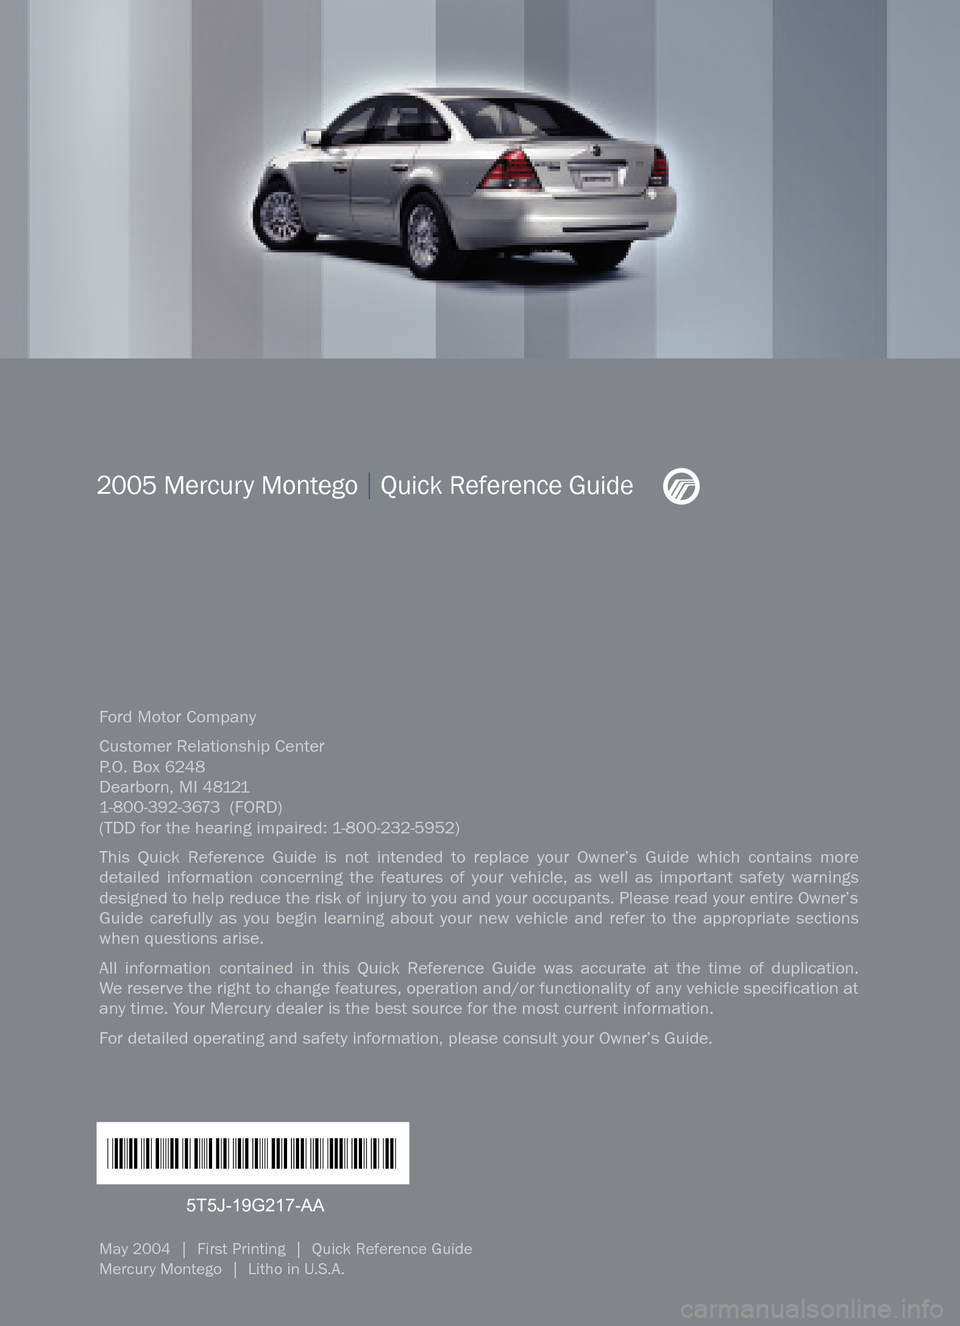 Mercury Montego 2005  Quick Reference Guide Ford Motor Company
Customer Relationship Center
P.O. Box 6248
Dearborn, MI 481211�800�392�3673  (FORD)(TDD for the hearing impaired: 1�800�232�5952)
This Quick Reference Guide is not intended to repla